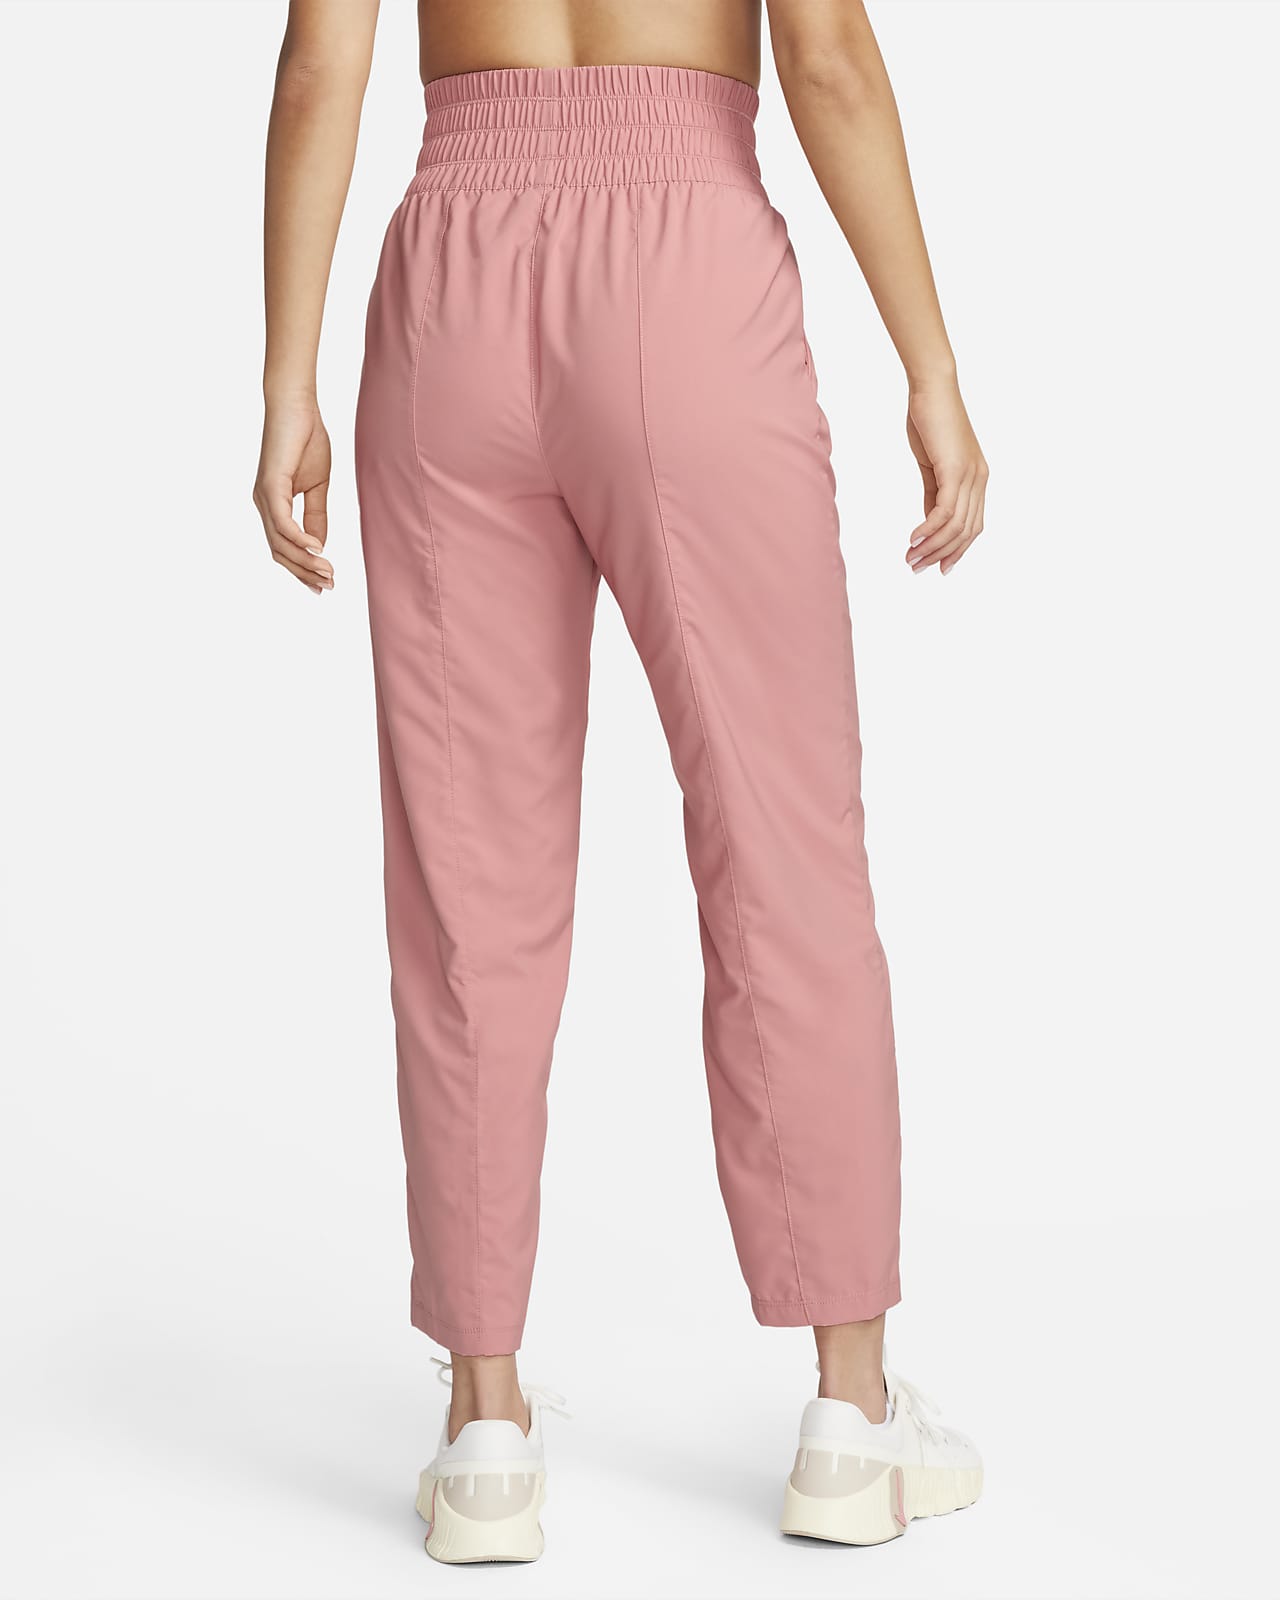 Buy LEE TEX Women Regular Fit Cotton Blend Trousers (32, Peach) at Amazon.in